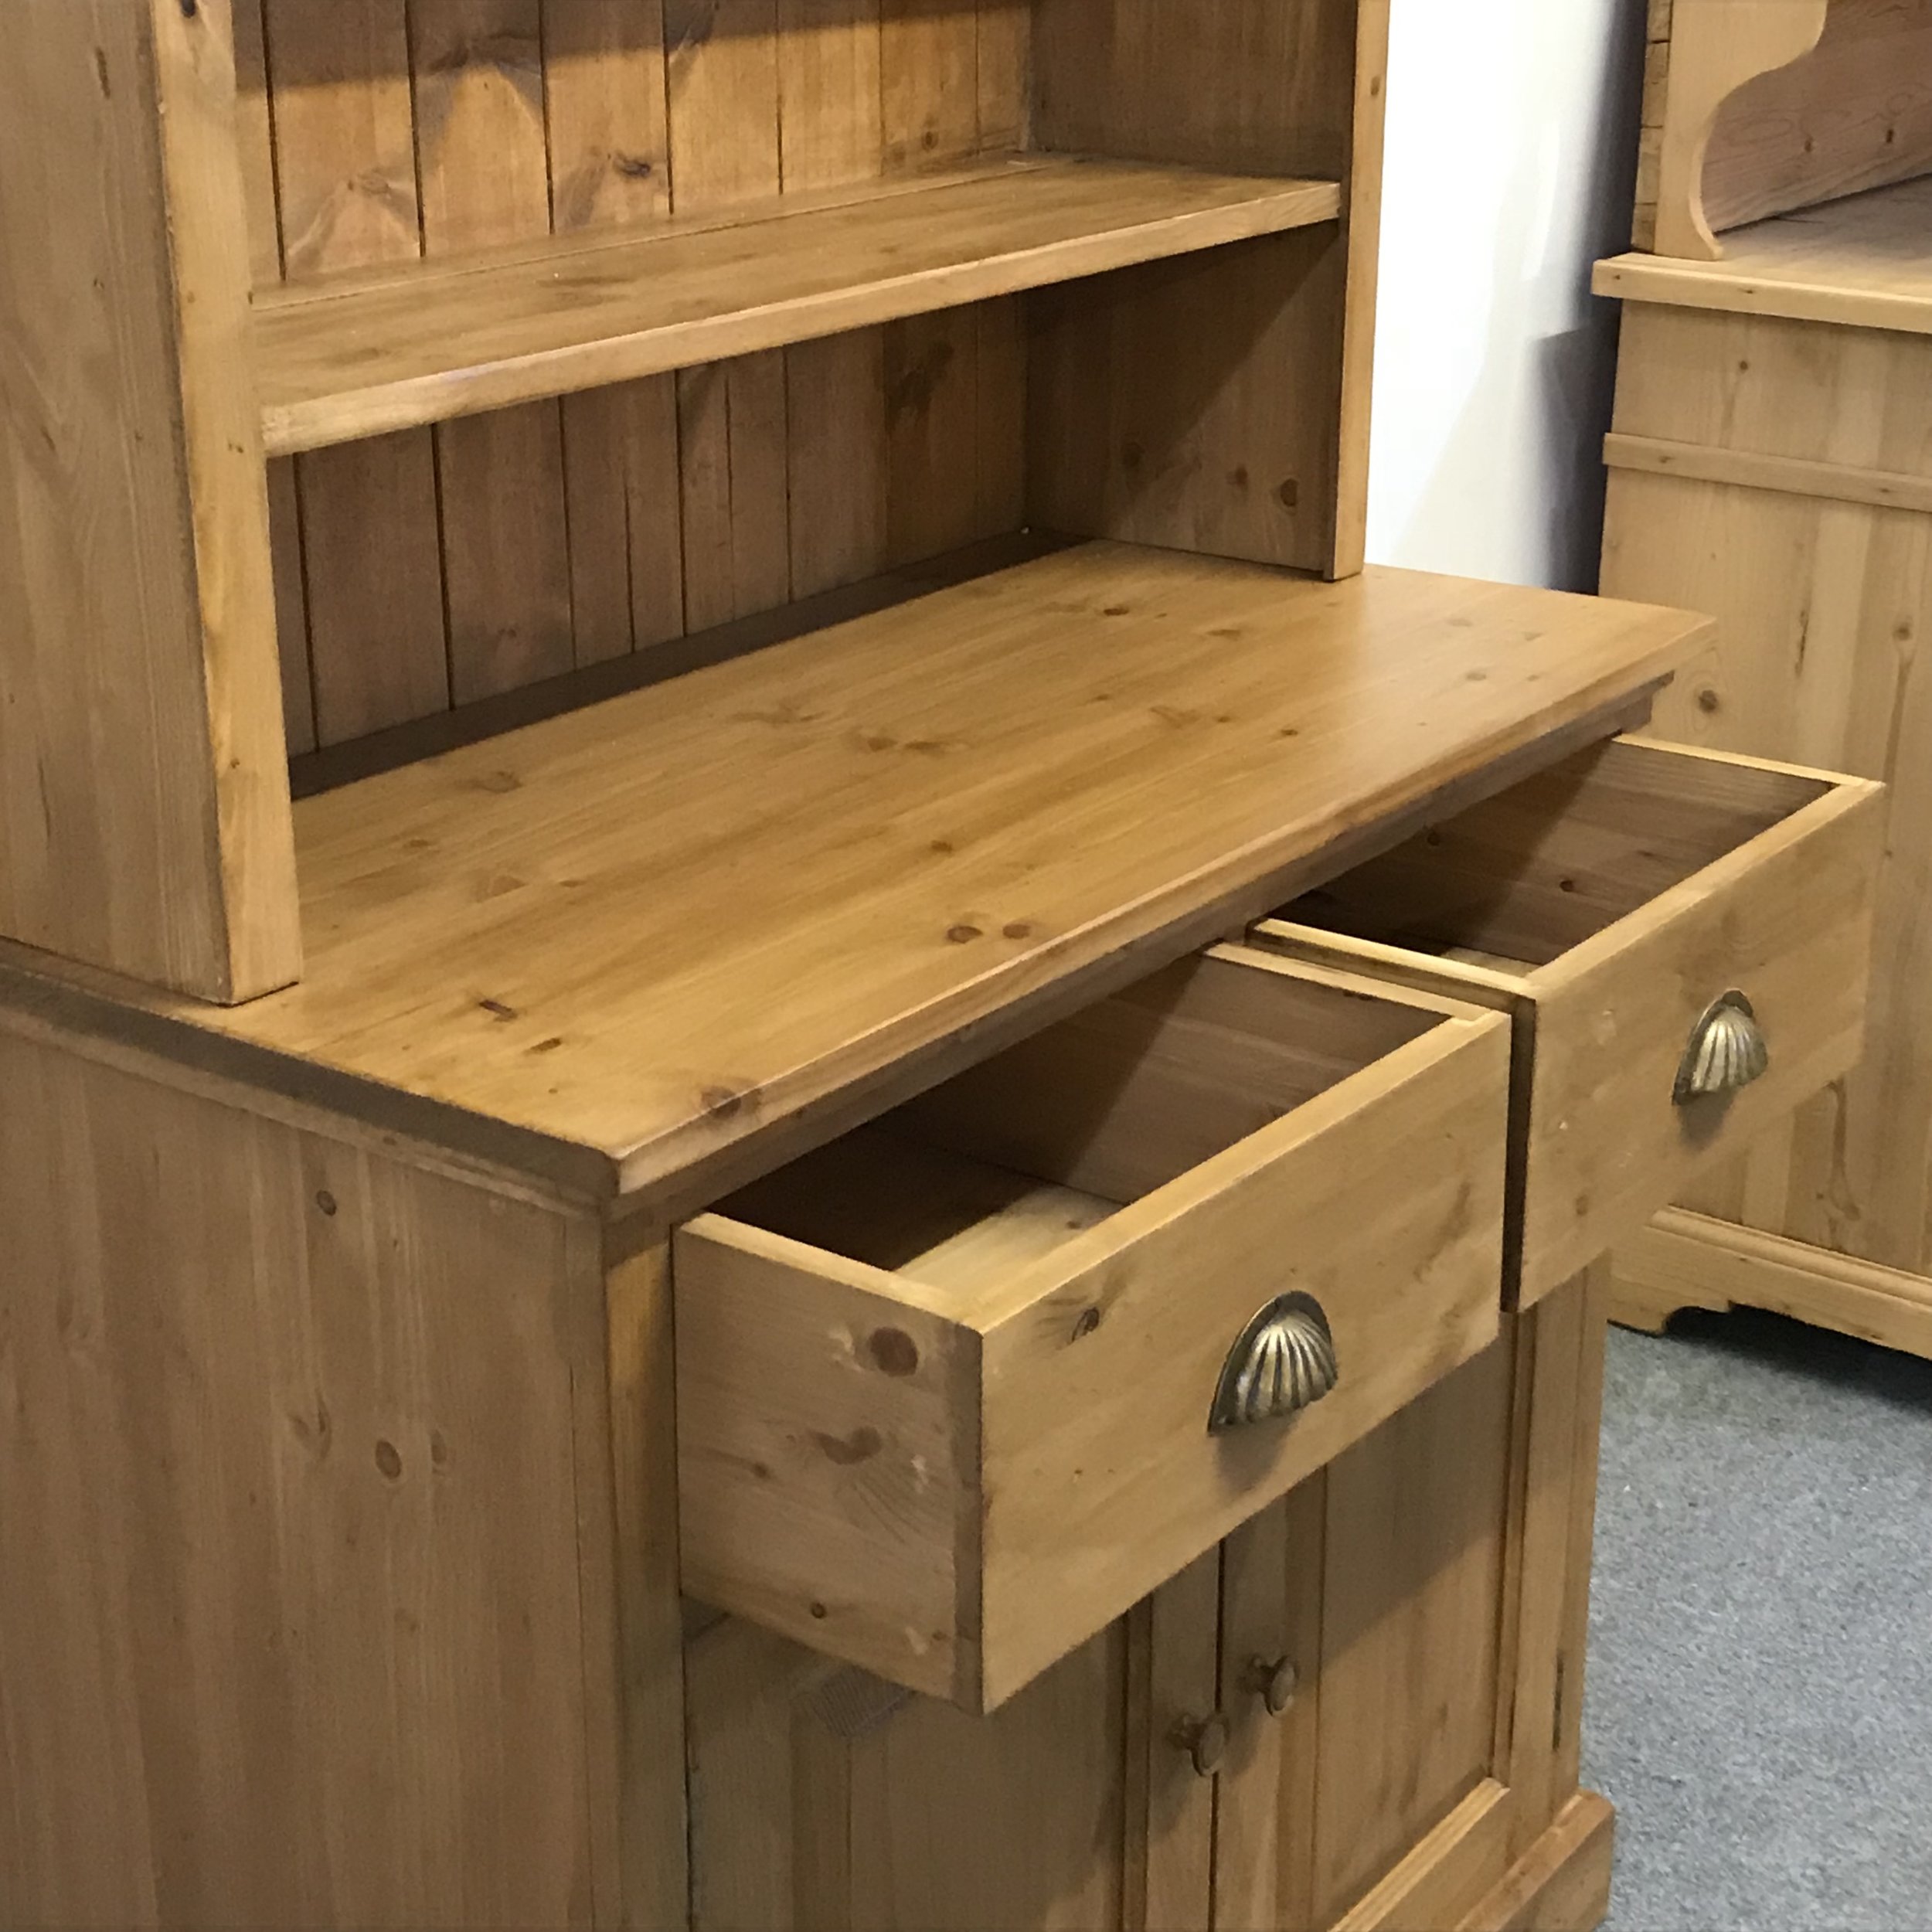 With or without drawers